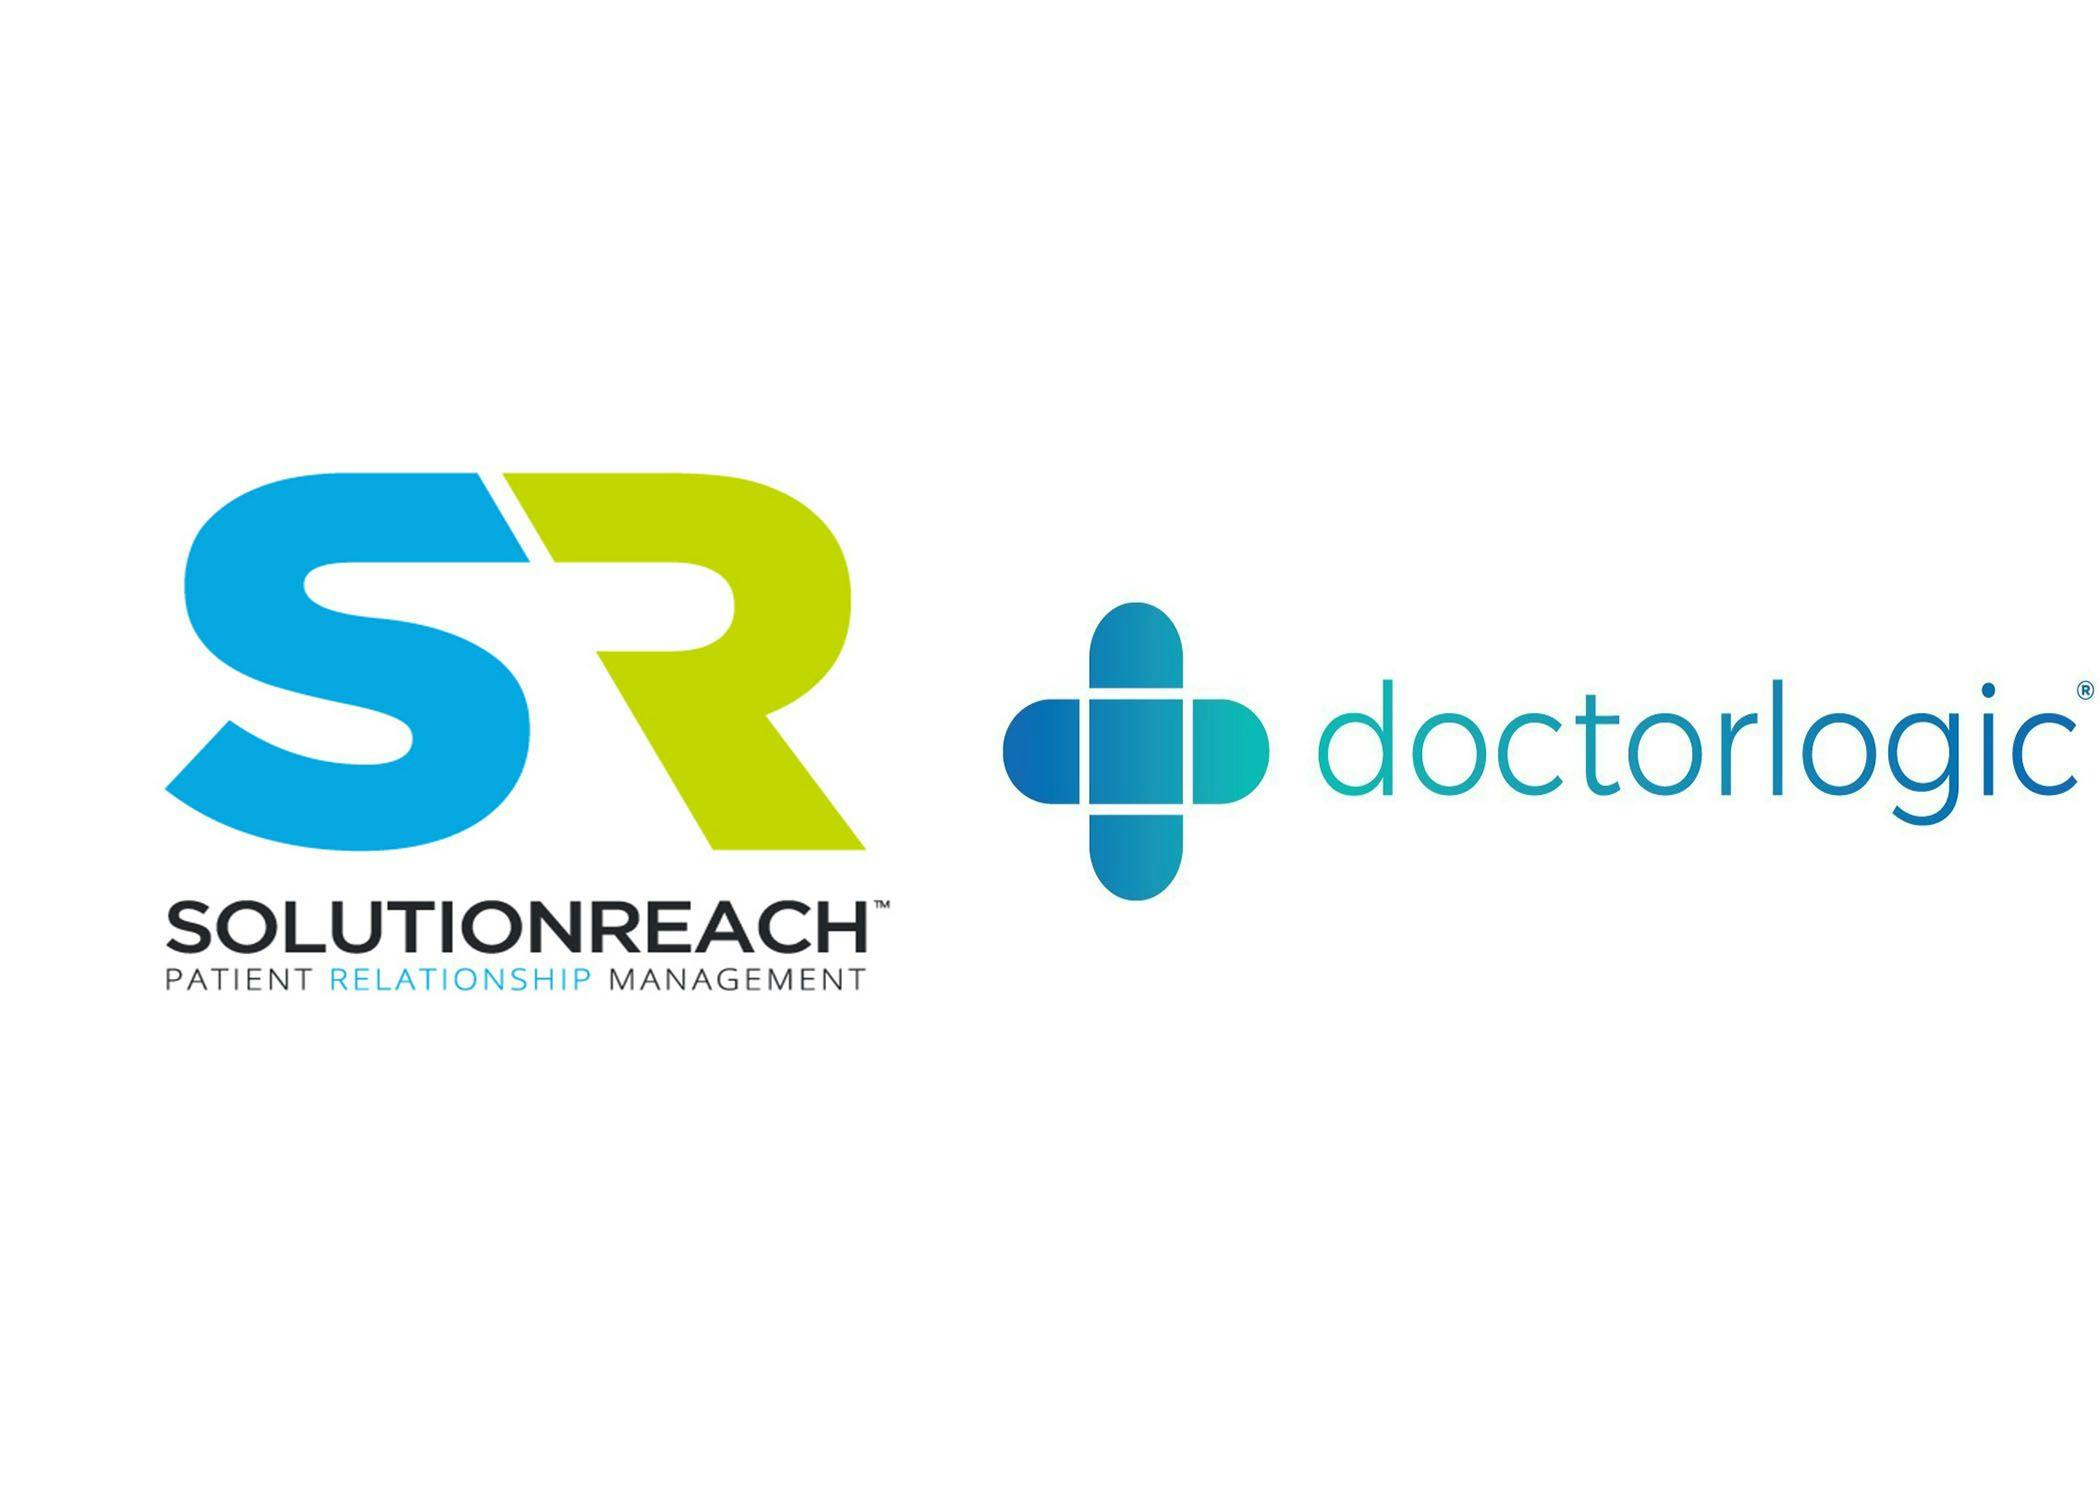 Solutionreach Partners with DoctorLogic to Expand Offerings